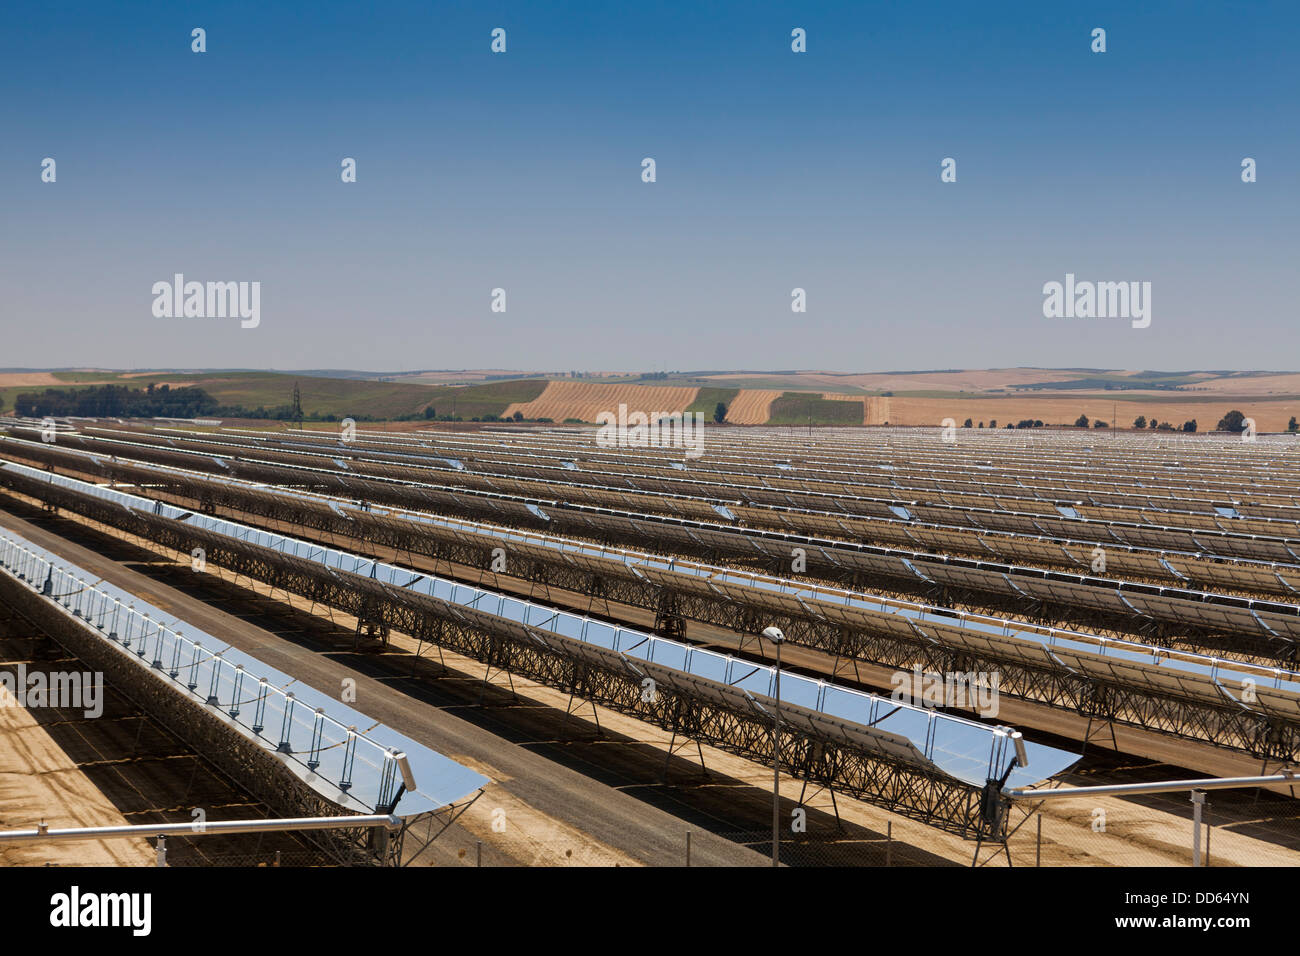 Solucar solar thermal complex near Seville Spain includes the PS10 & PS20 solar thermal power and Solnova solar power stations. Stock Photo